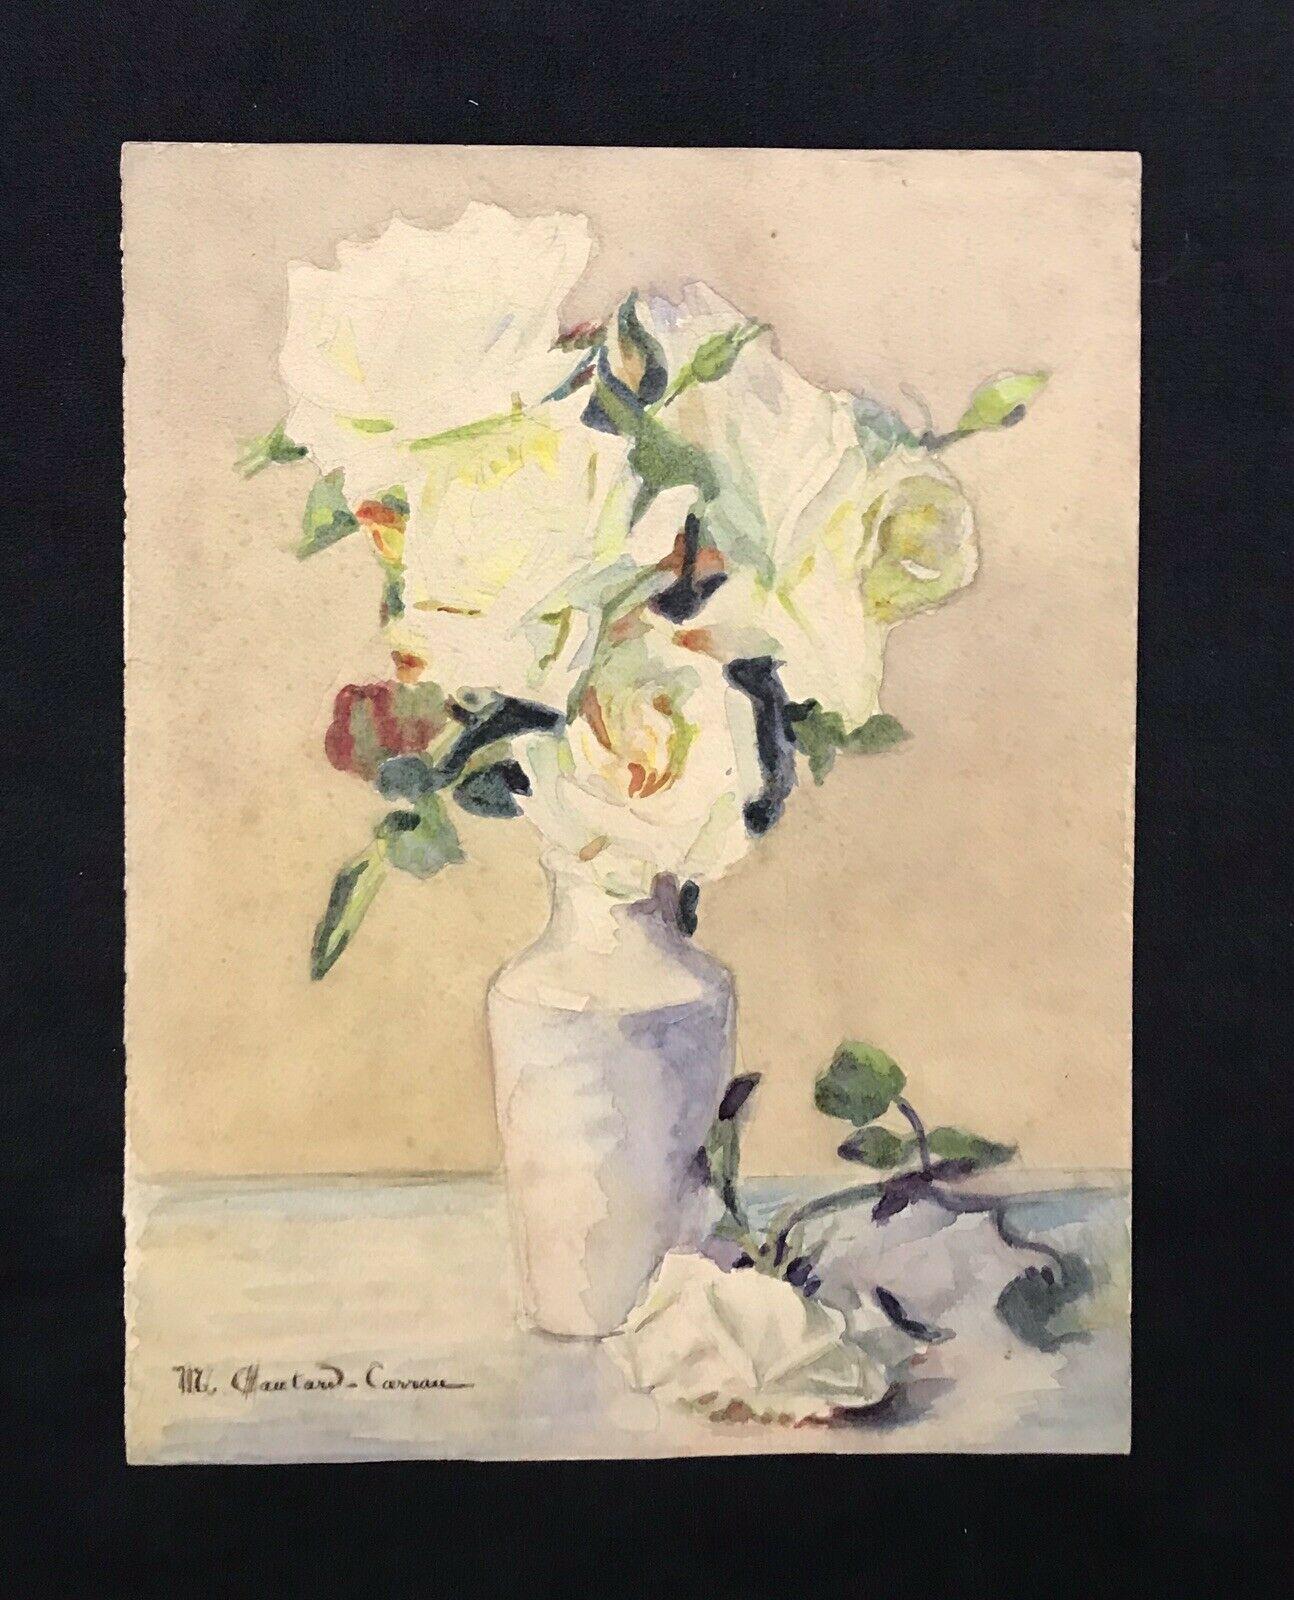 MARIE CHAUTARD-CARREAU - FINE EARLY 20thC FRENCH IMPRESSIONIST- ROSES IN VASE - Painting by Marie-Amelie Chautard-Carreau